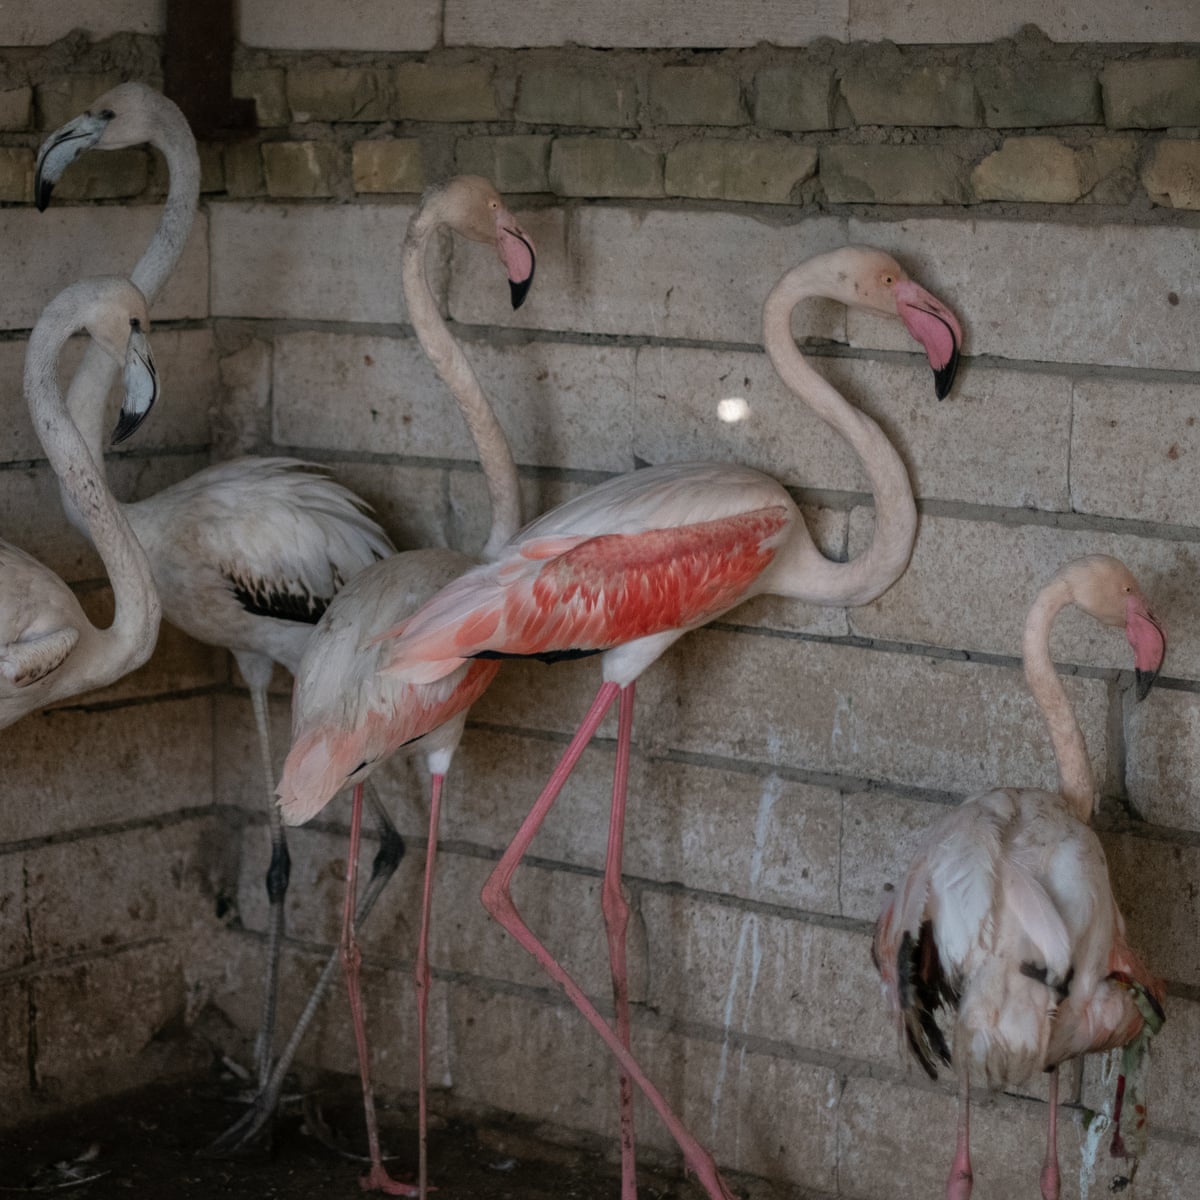 Looking for a flamingo?': bird trafficking in Iraq – photo essay |  Environment | The Guardian